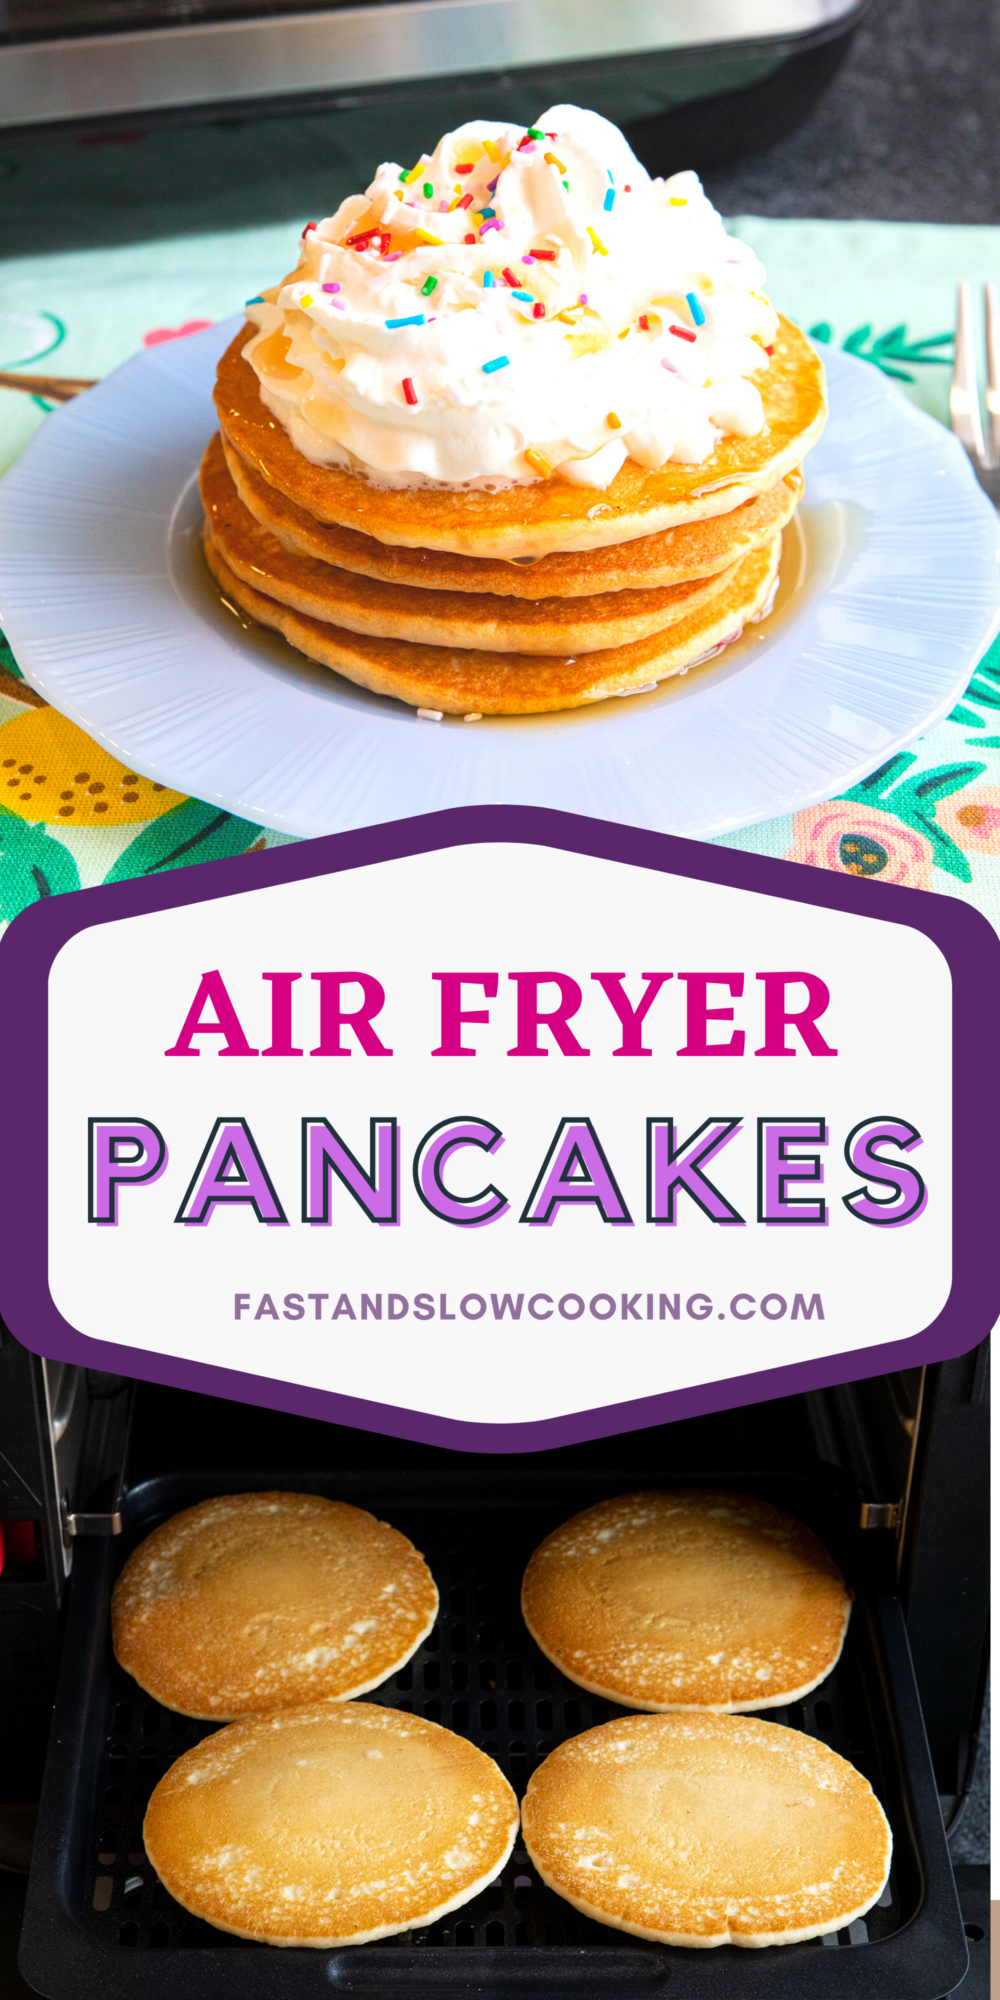 How to quickly heat up frozen pancakes in your air fryer for a fast and easy breakfast!
